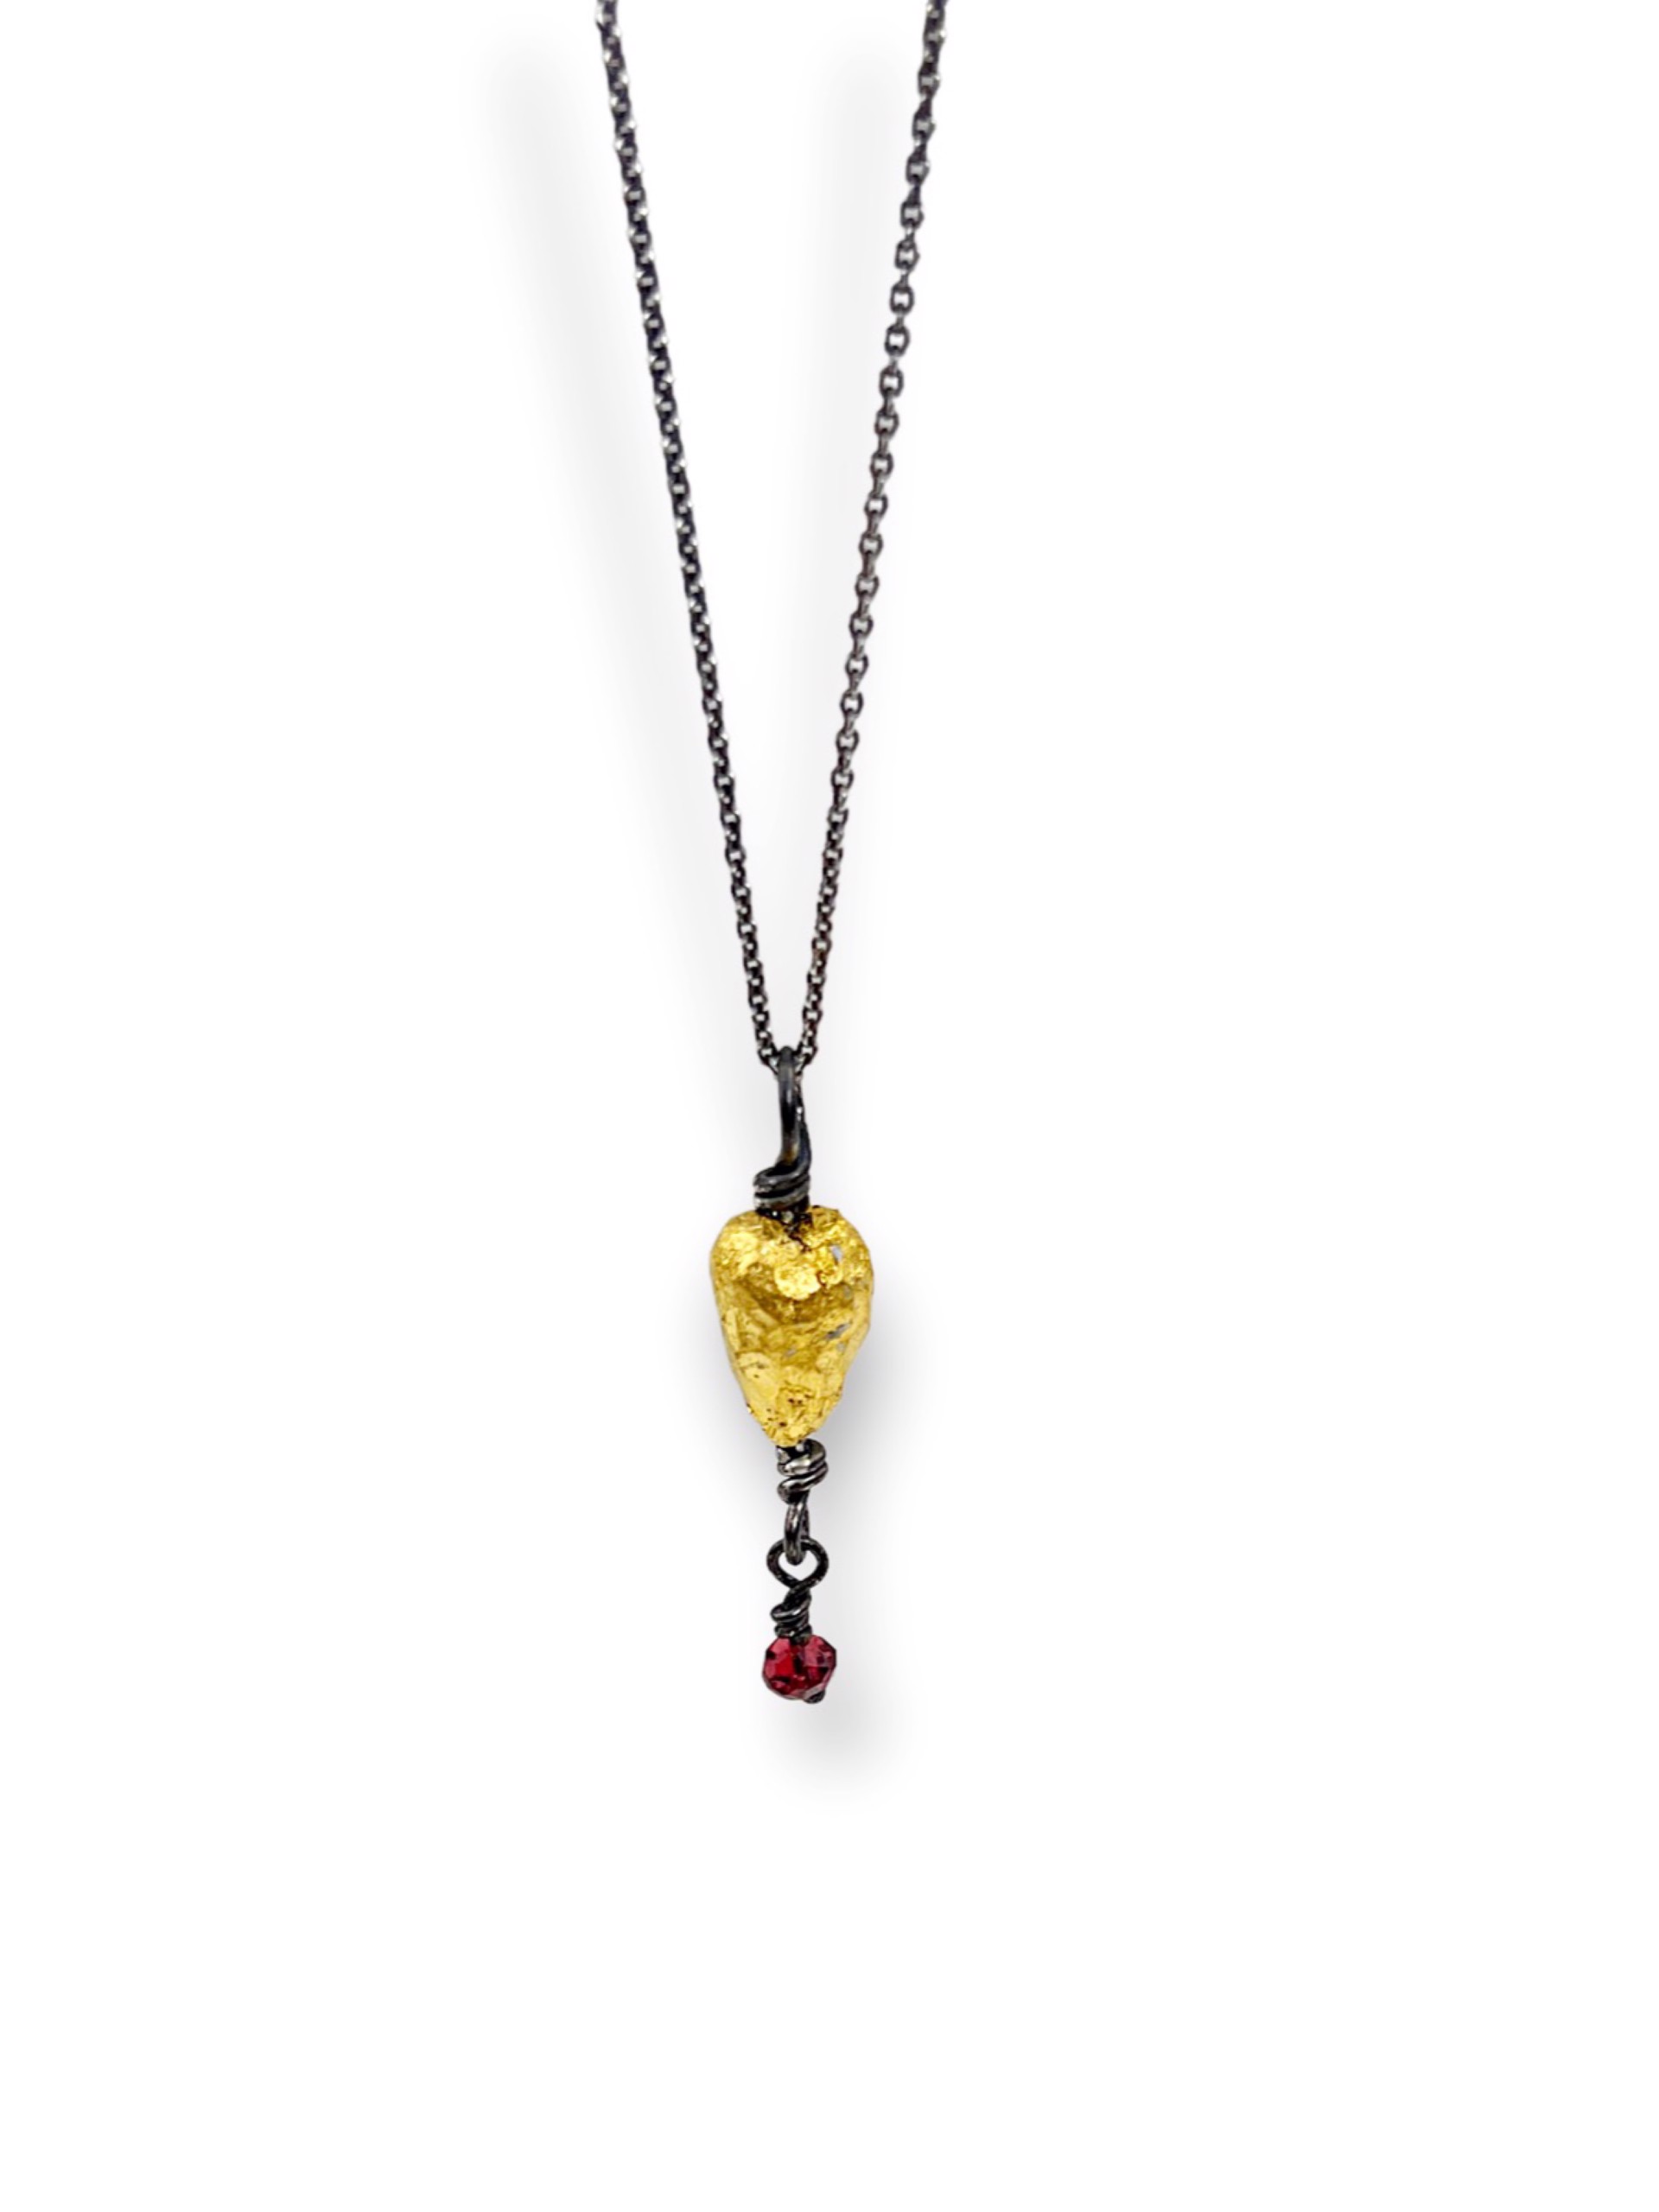 Gold Heart Necklace with Garnet Drop by Terry Williams Brau